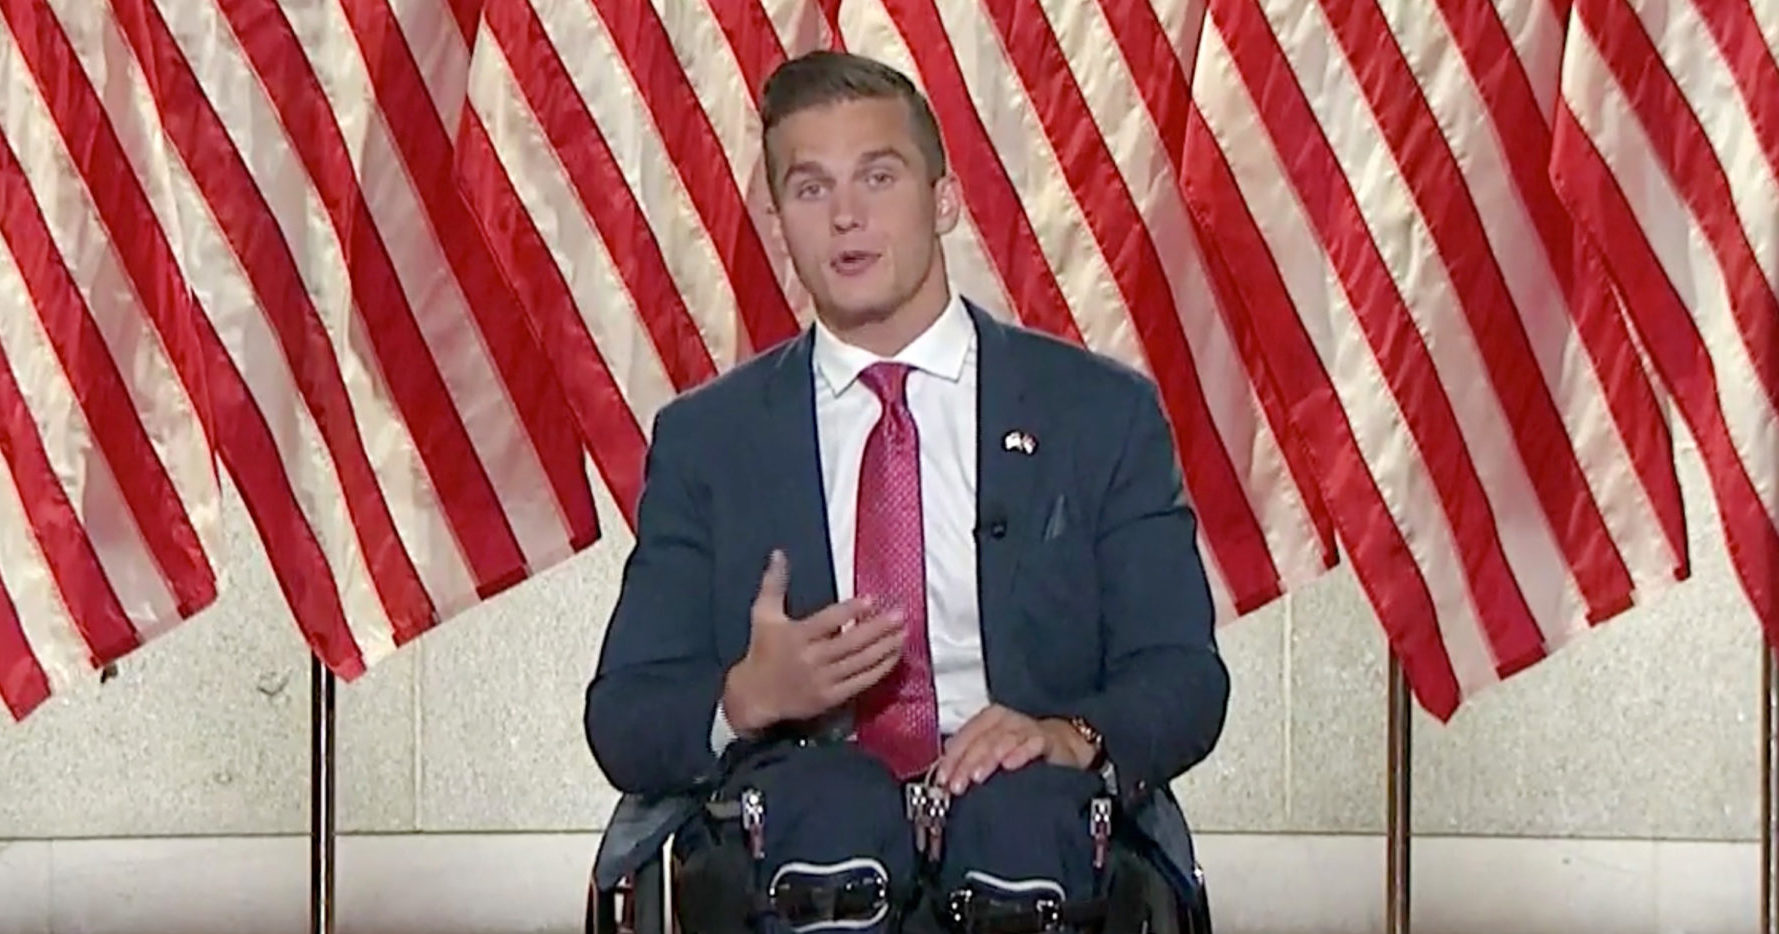 Madison Cawthorn, now a Republican representative-elect from North Carolina, addresses the virtual Republican National Convention on Aug. 26, 2020.